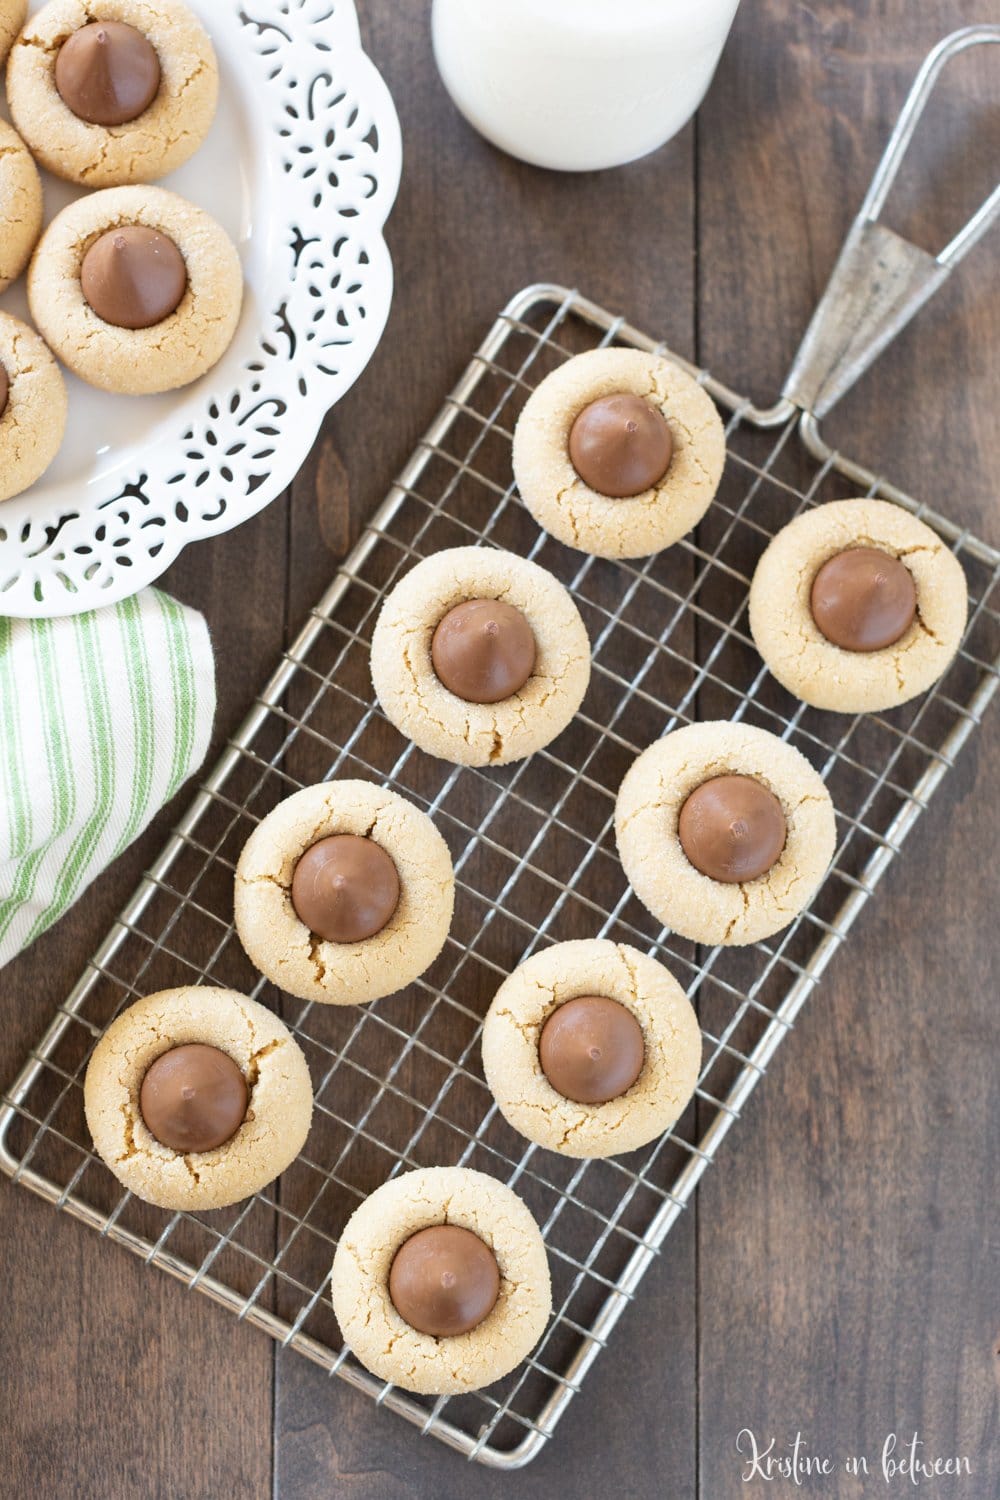 Perfect peanut butter kiss cookies. A holiday classic! This is an old family recipe that has been tested over the years.